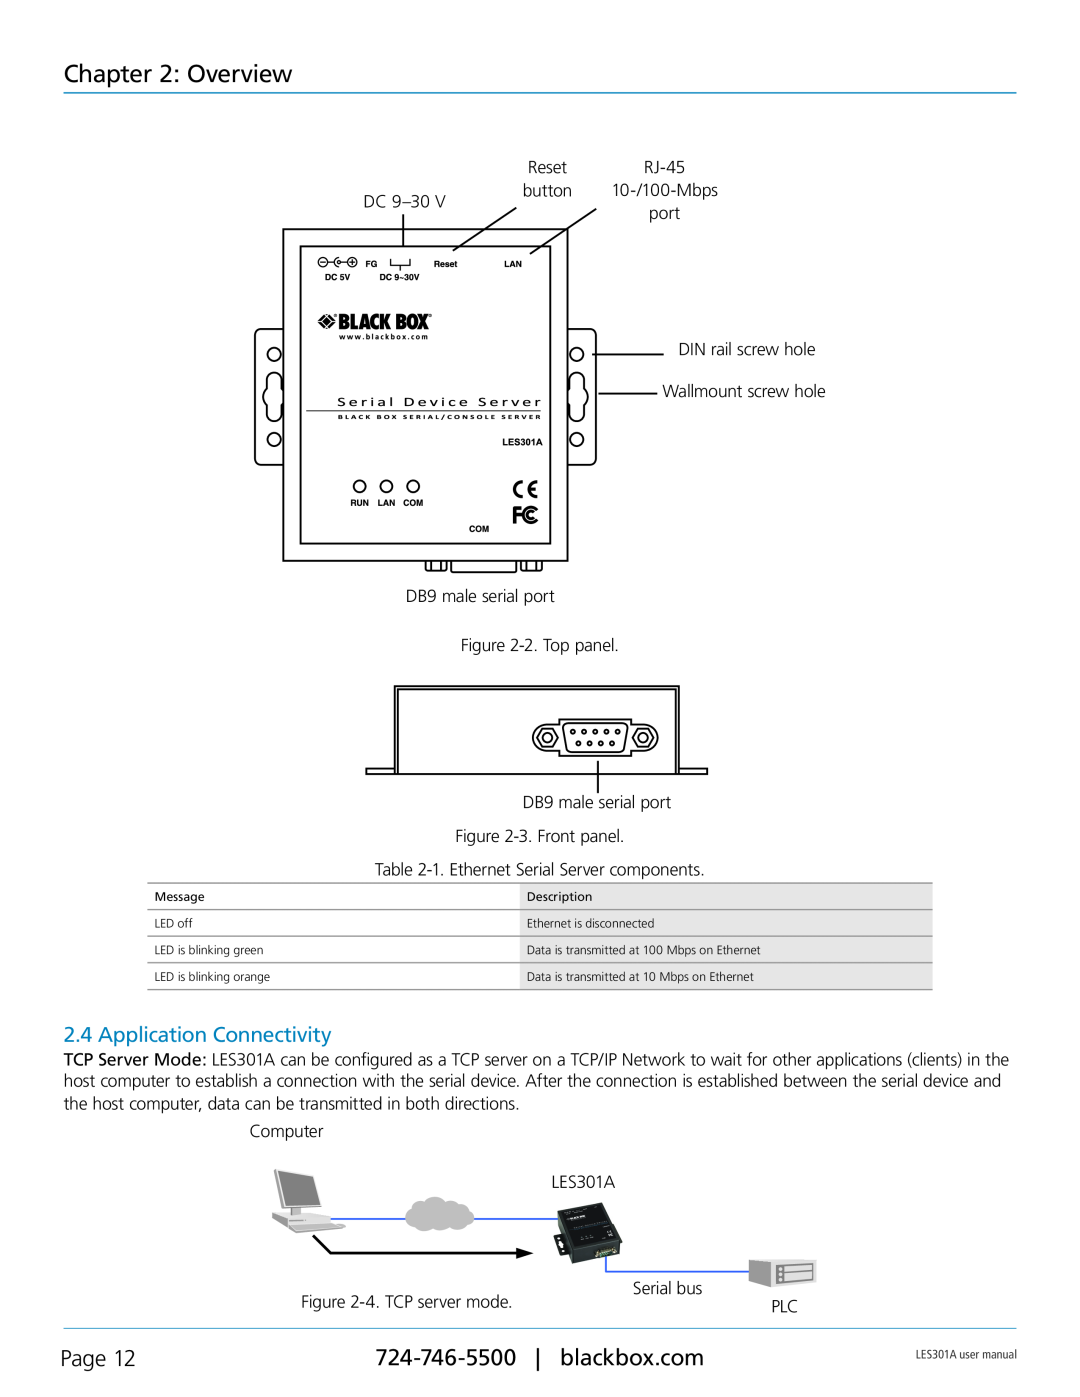 Black Box RS-422, RS-232, RS-485, 1-Port 10/100 Device Server user manual Overview, Page, Application Connectivity 